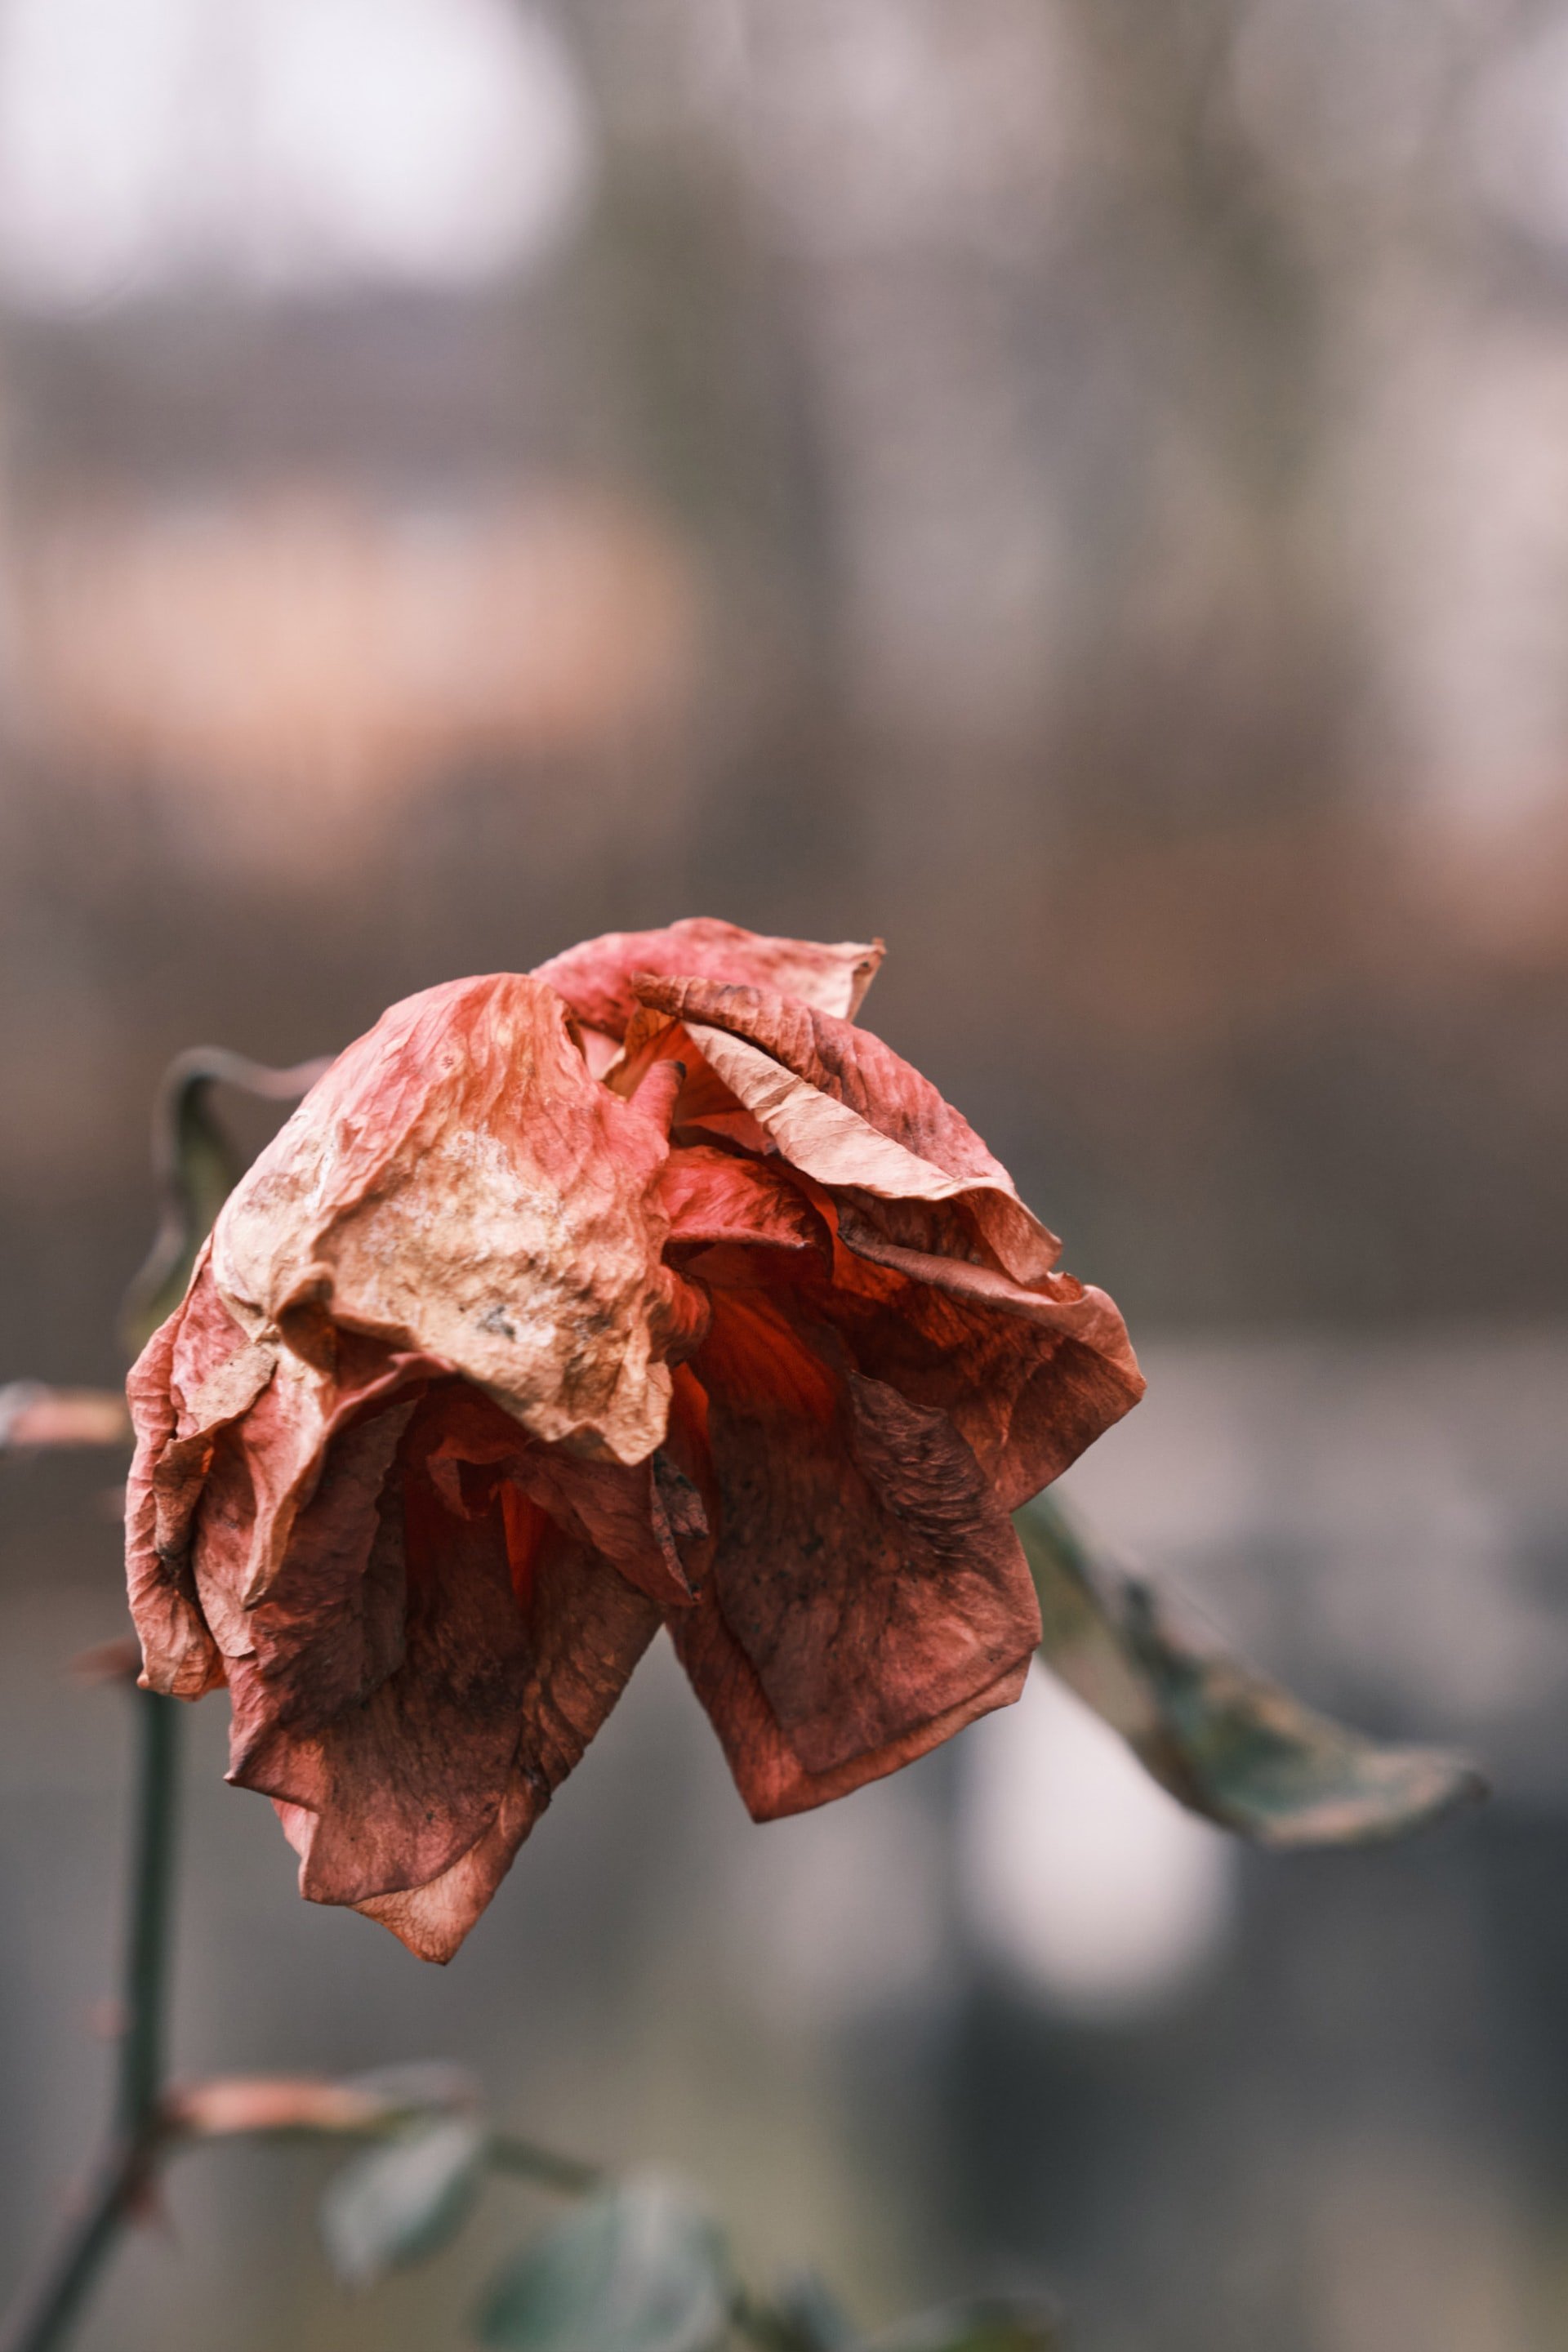 Withered flower | Source: Unsplash